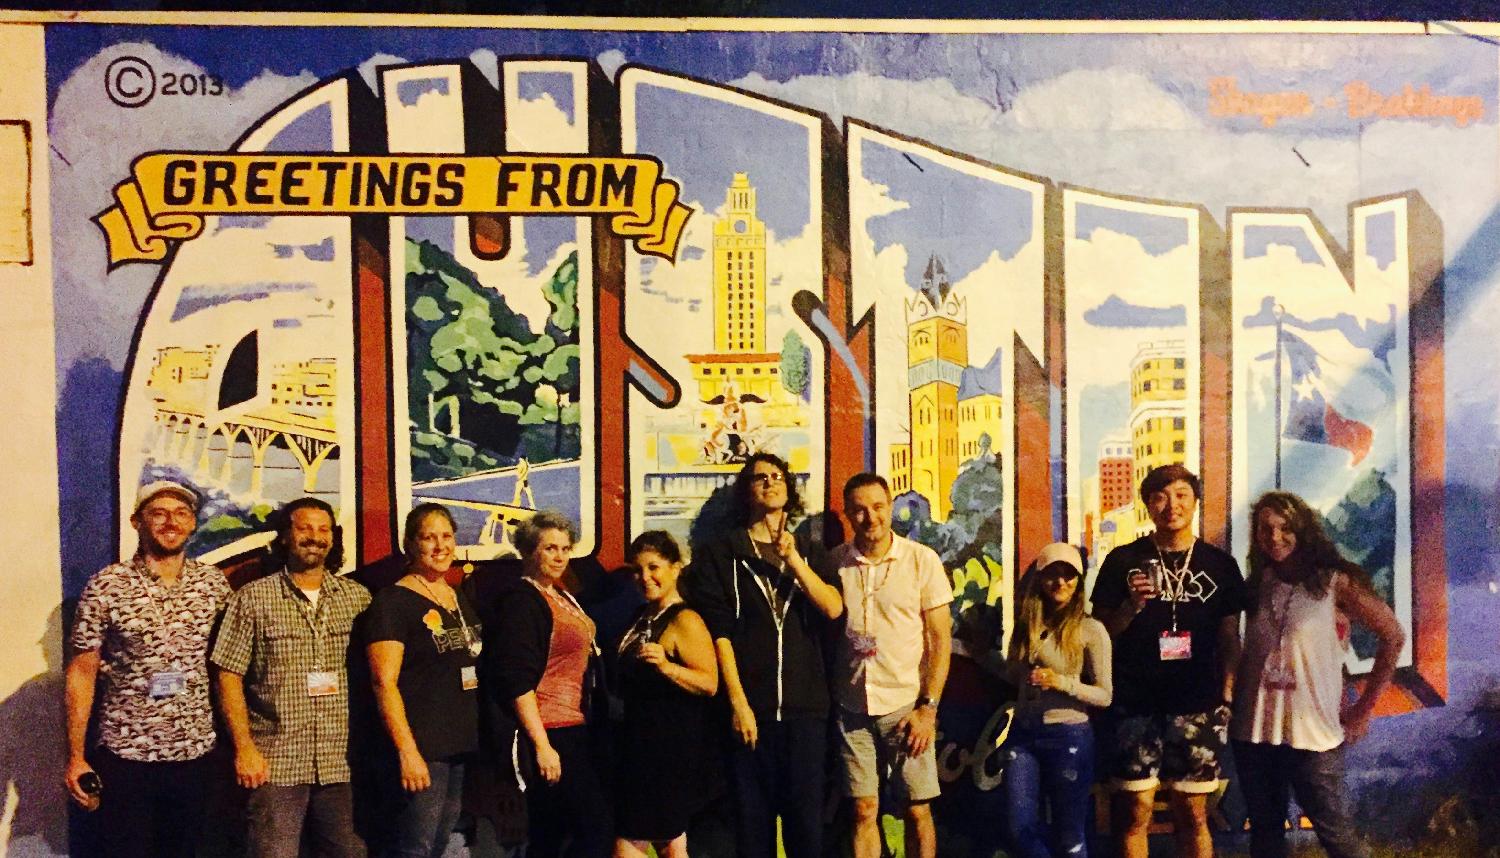 The team in Austin on our work retreat